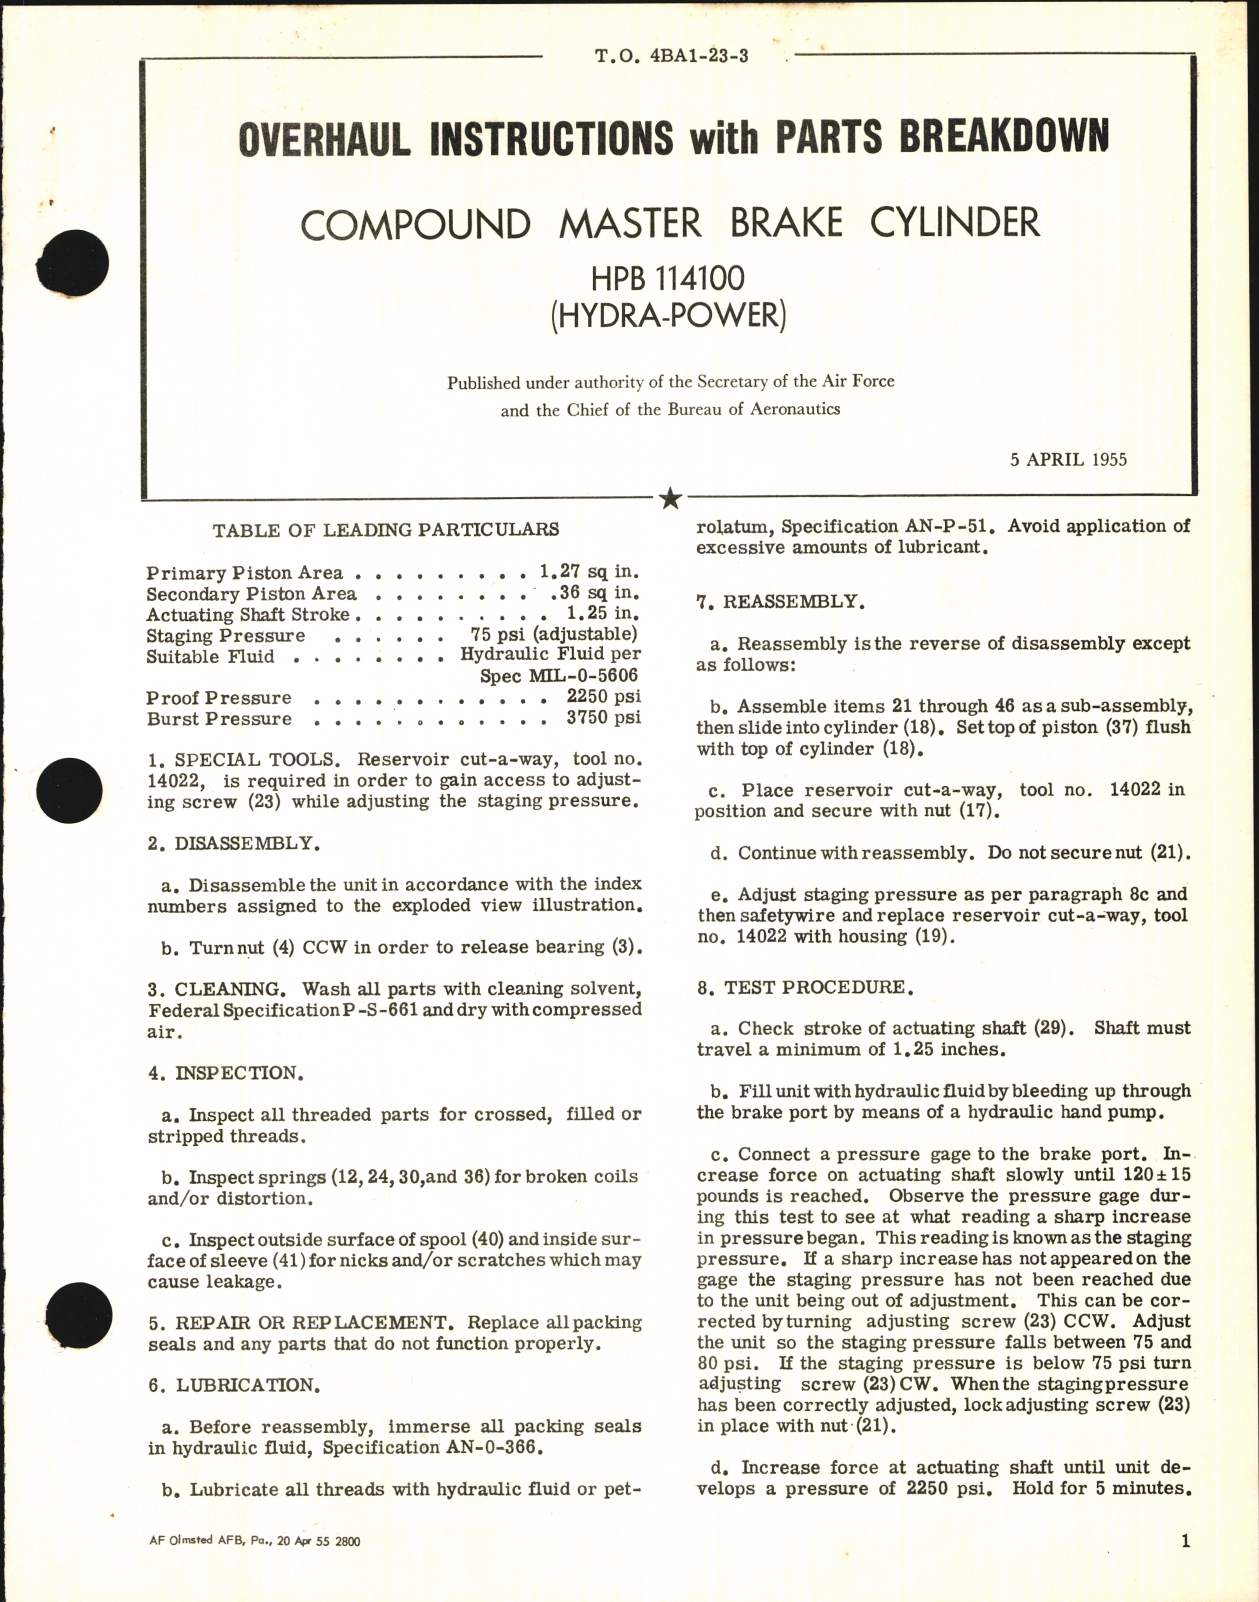 Sample page 1 from AirCorps Library document: Overhaul Instructions with Parts Breakdown for Compound Master Brake Cylinder HPB 114100